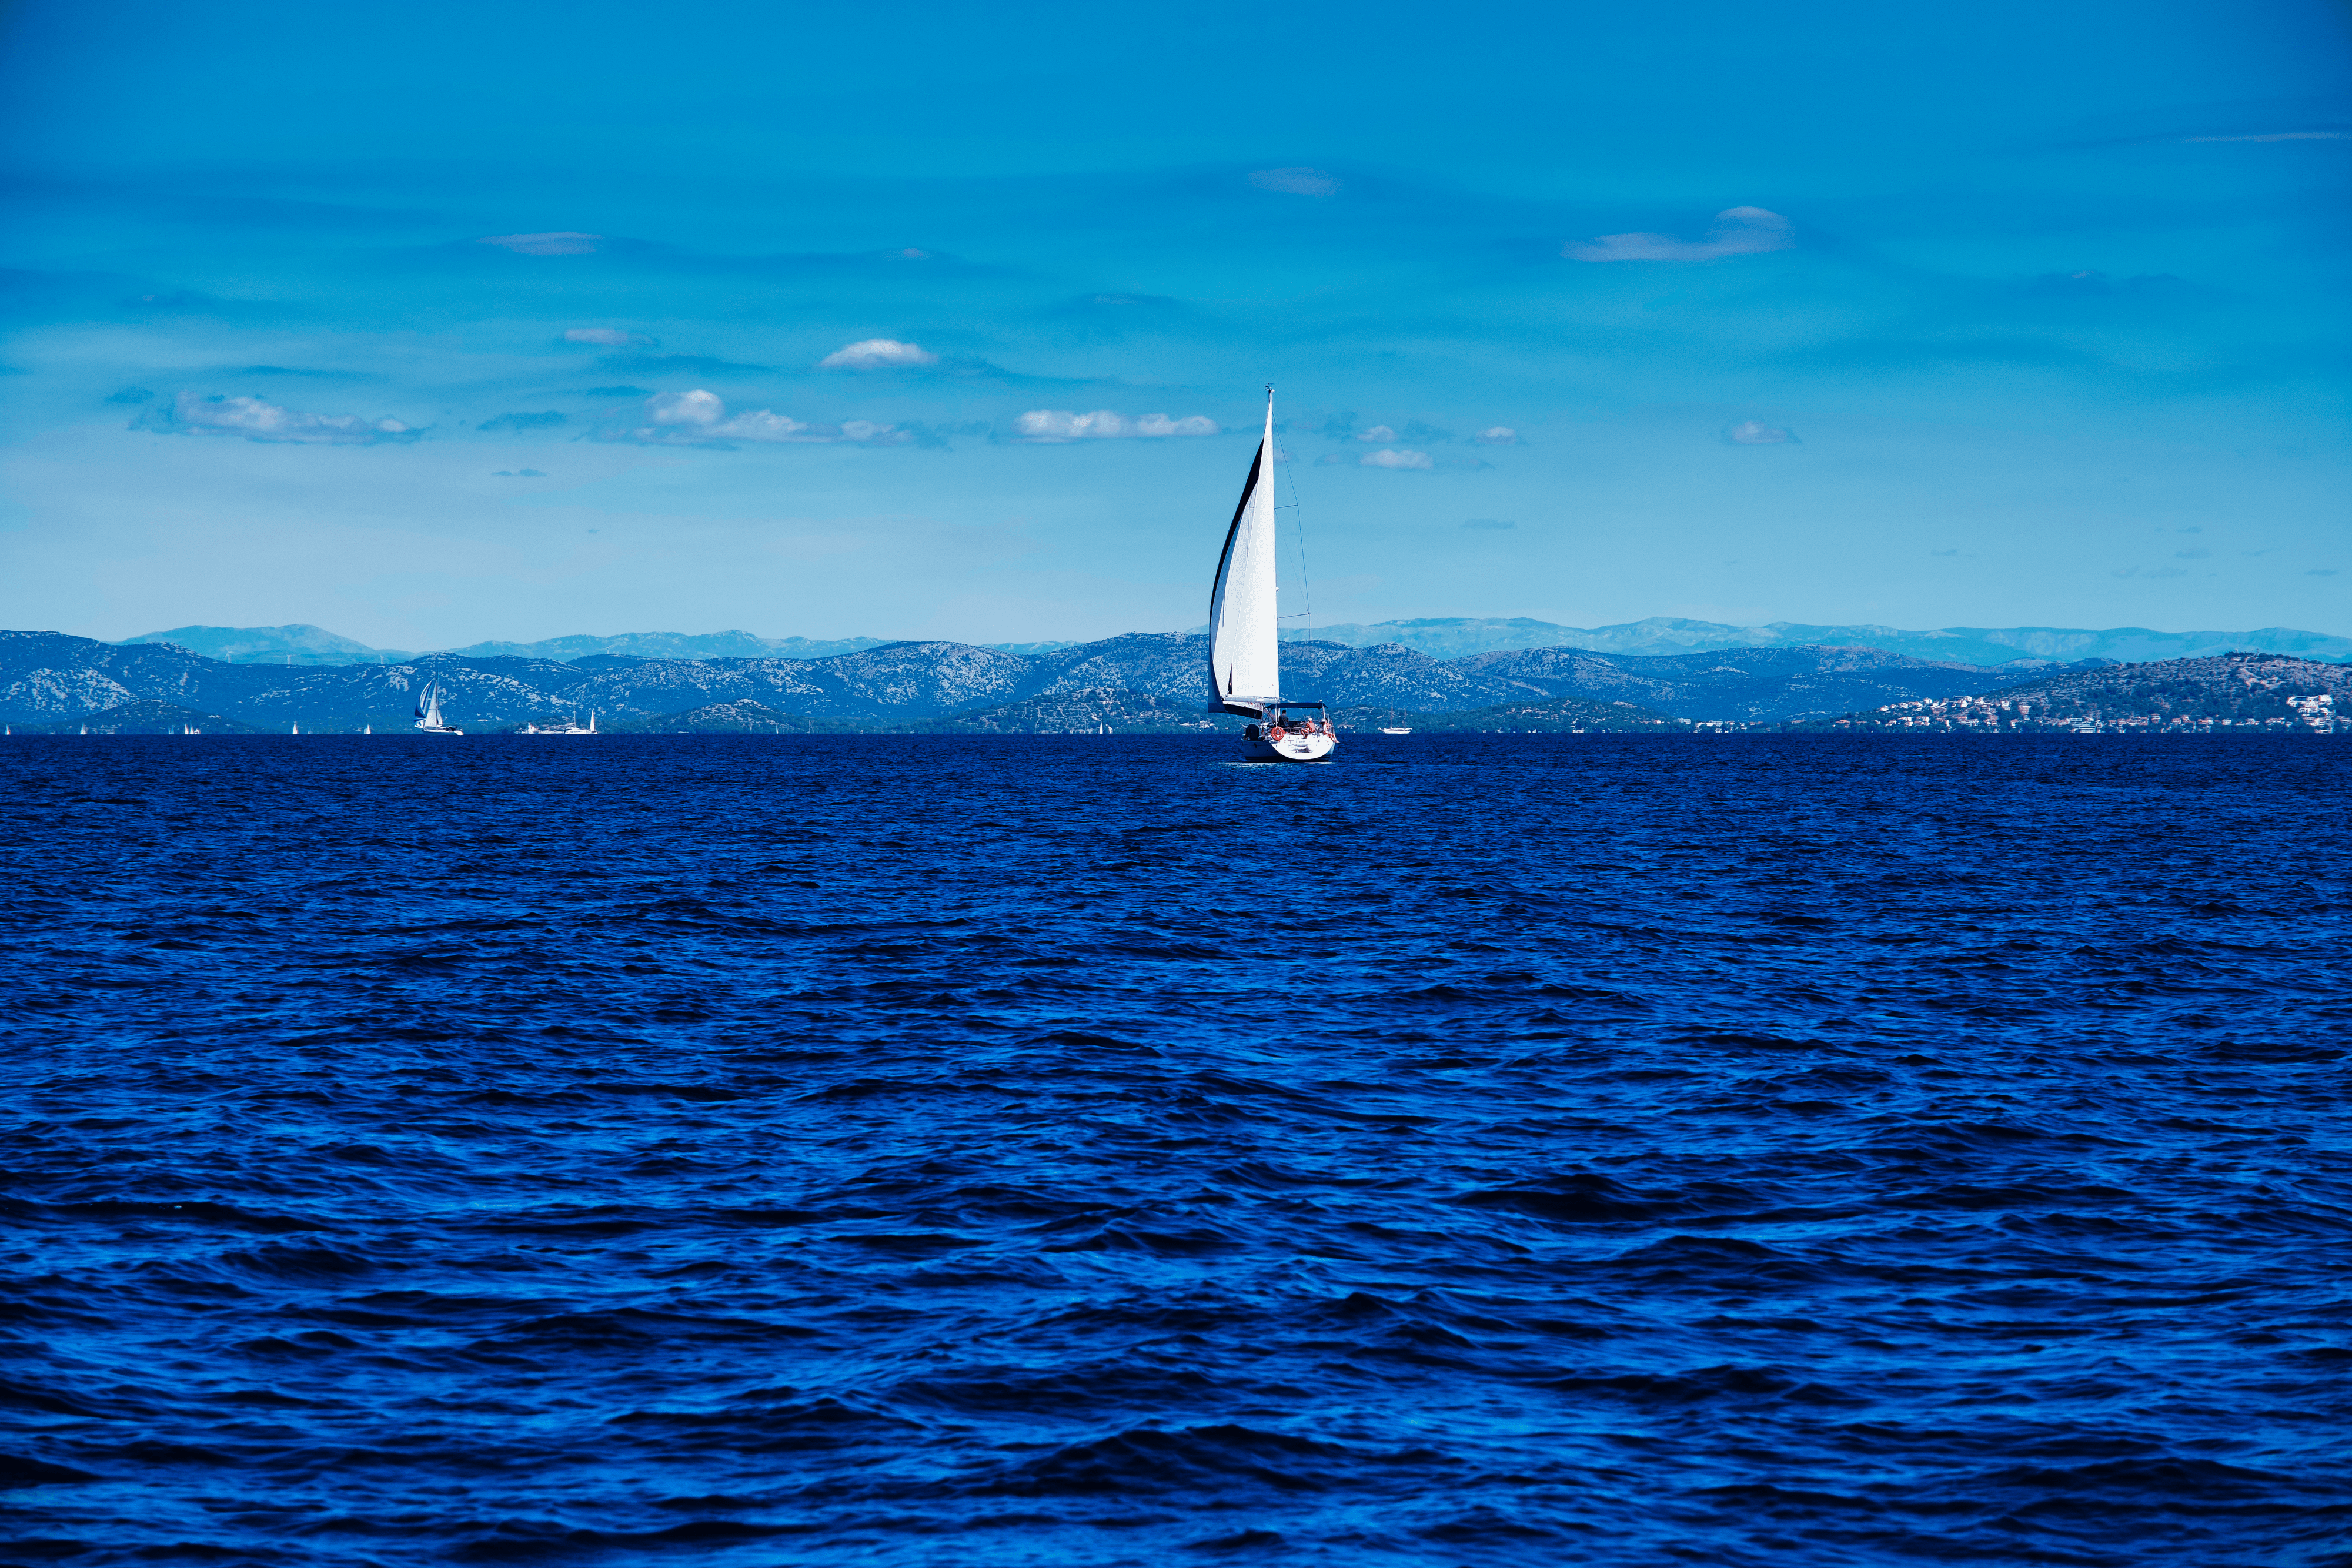 #4 The One Sail Boat on Adriatic Sea